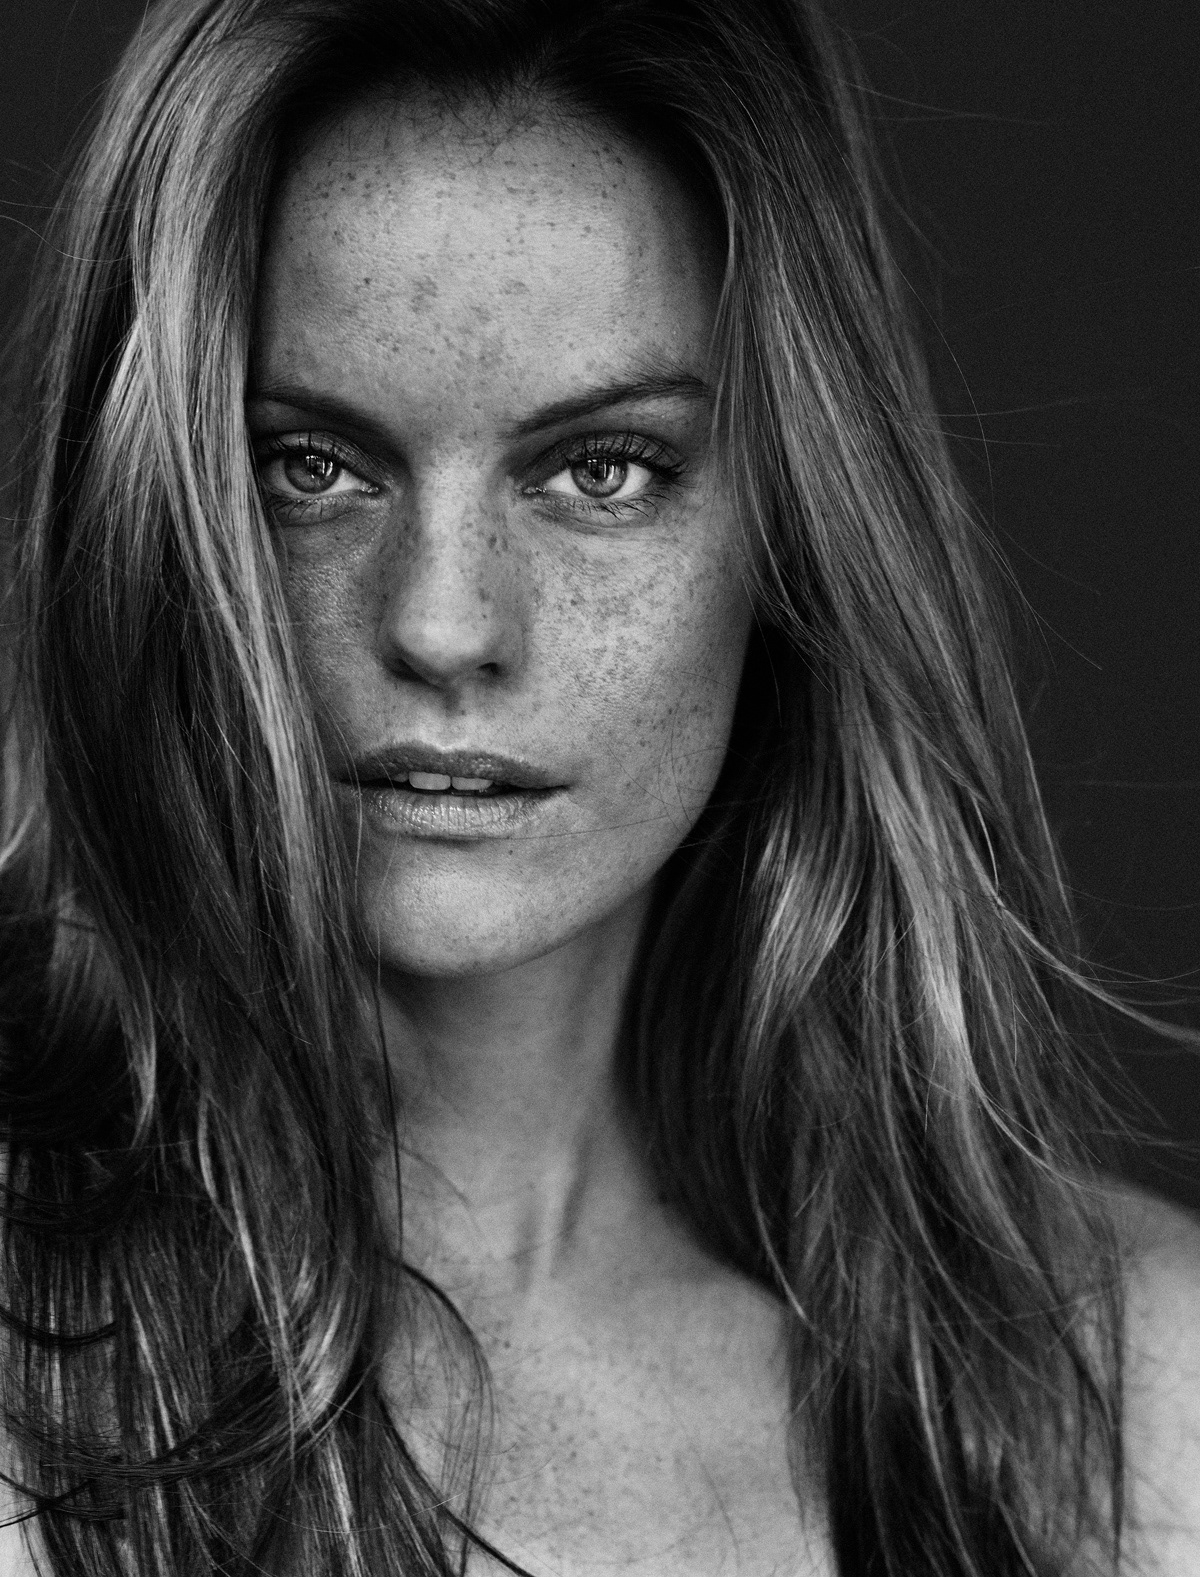 Carsten Witte - The Freckles Project